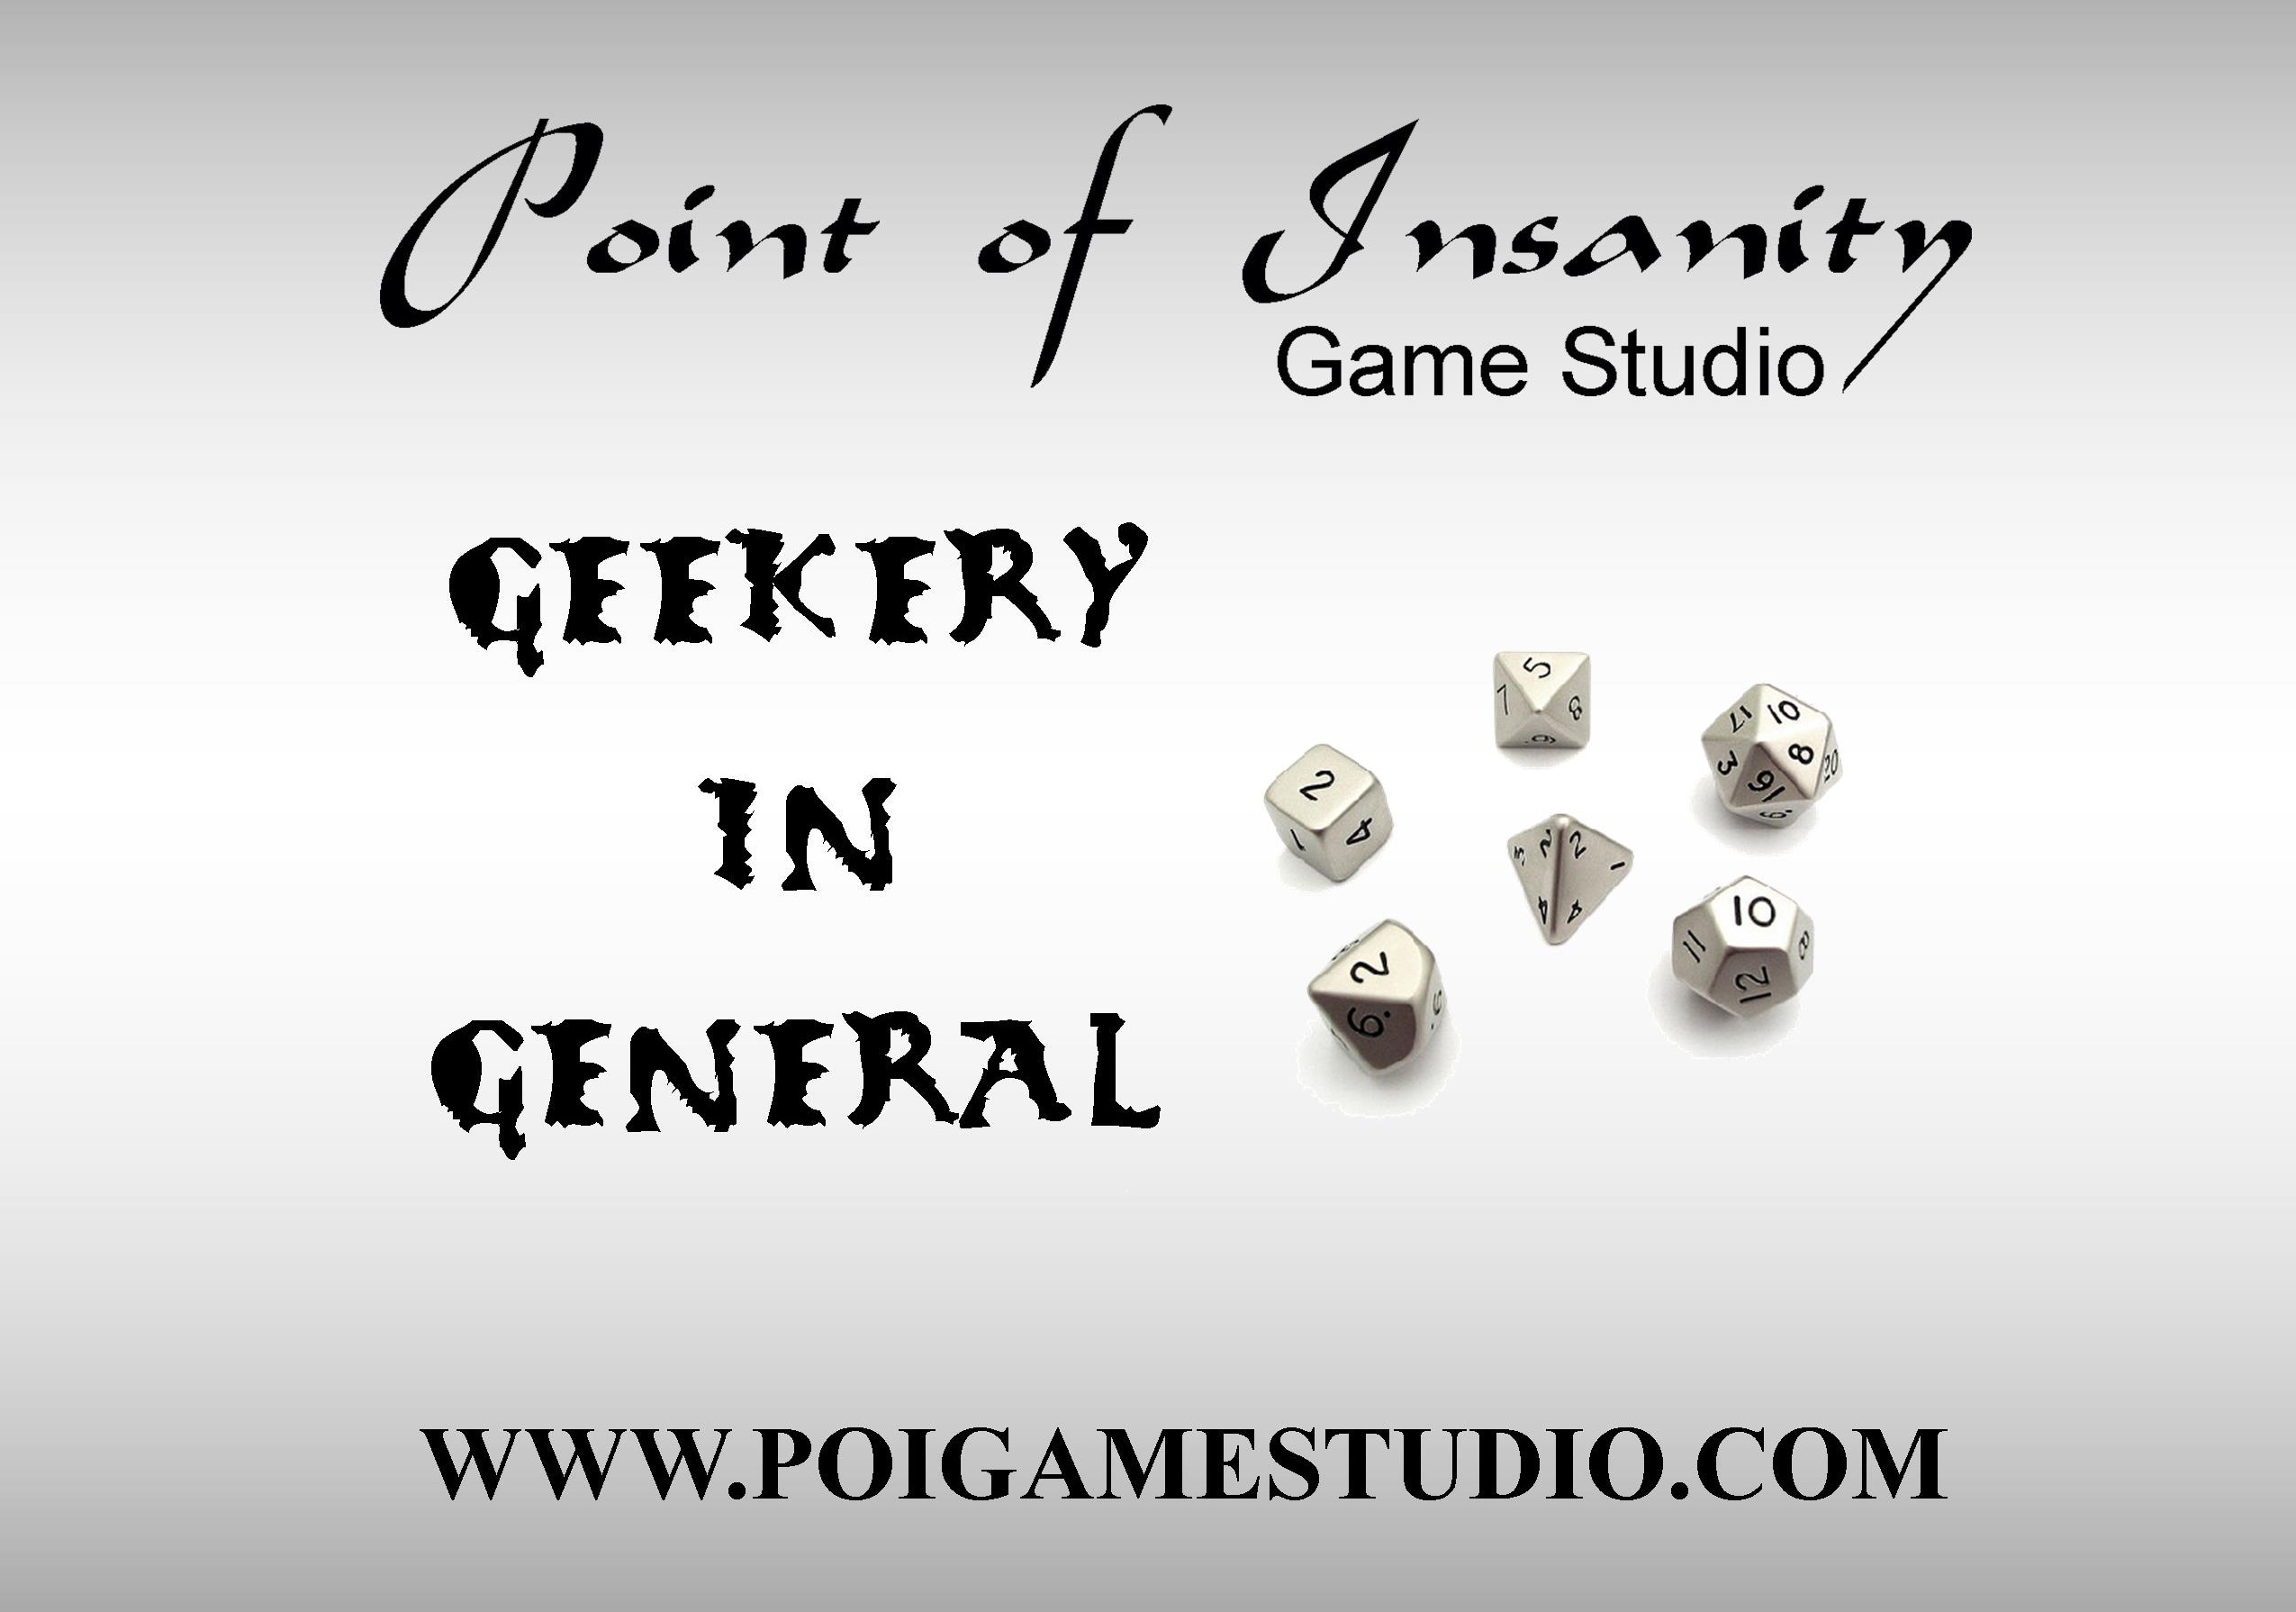 Geekery in General 209: The Flying Guillotine